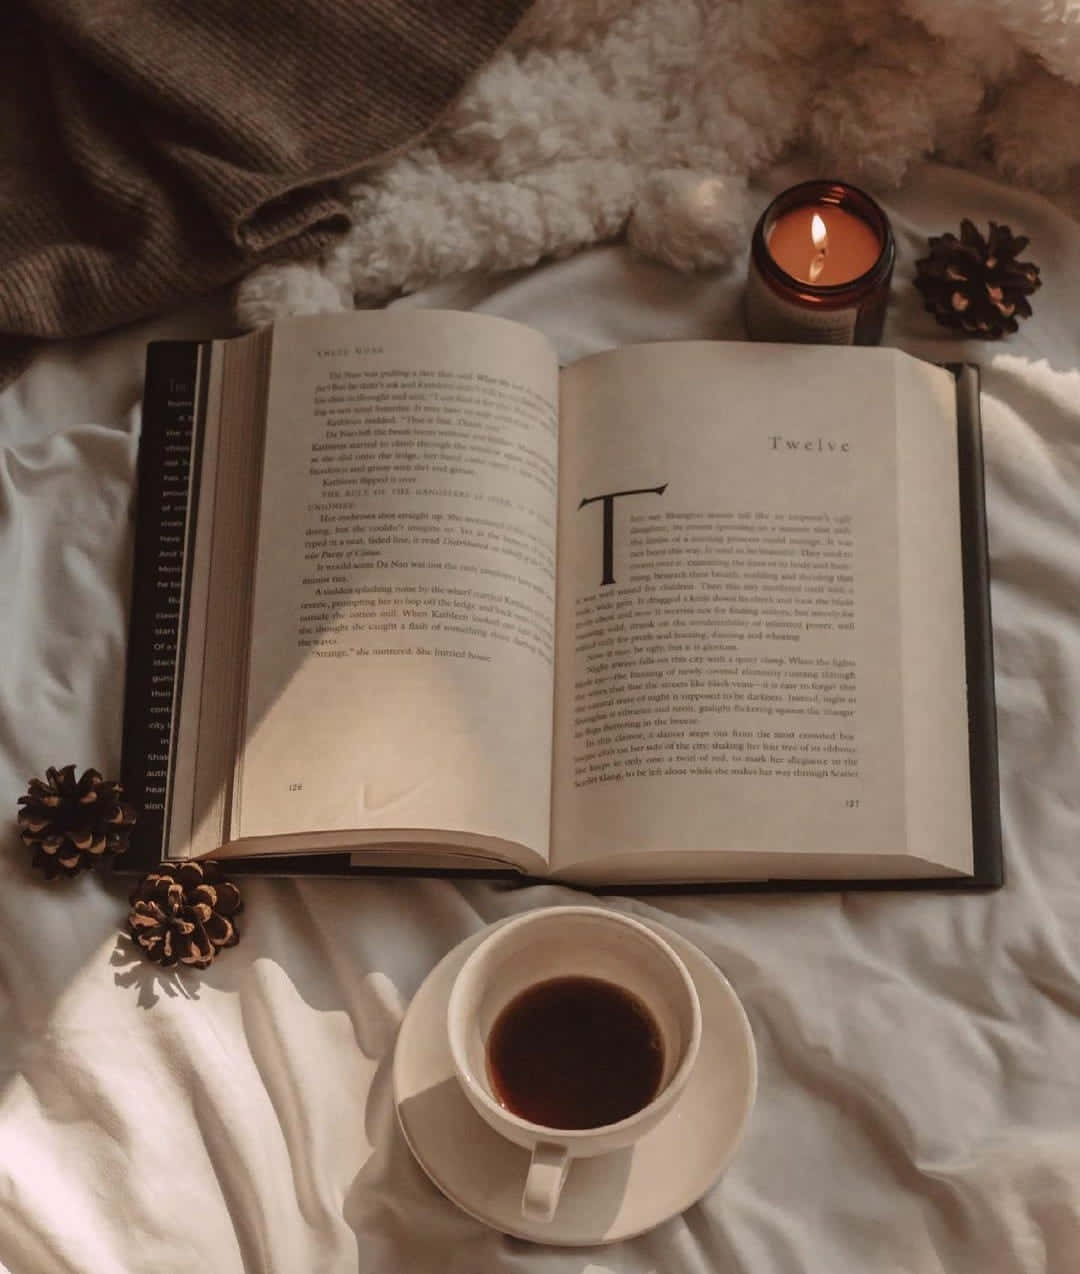 A Book, Candle, And Cup Of Coffee On A Bed